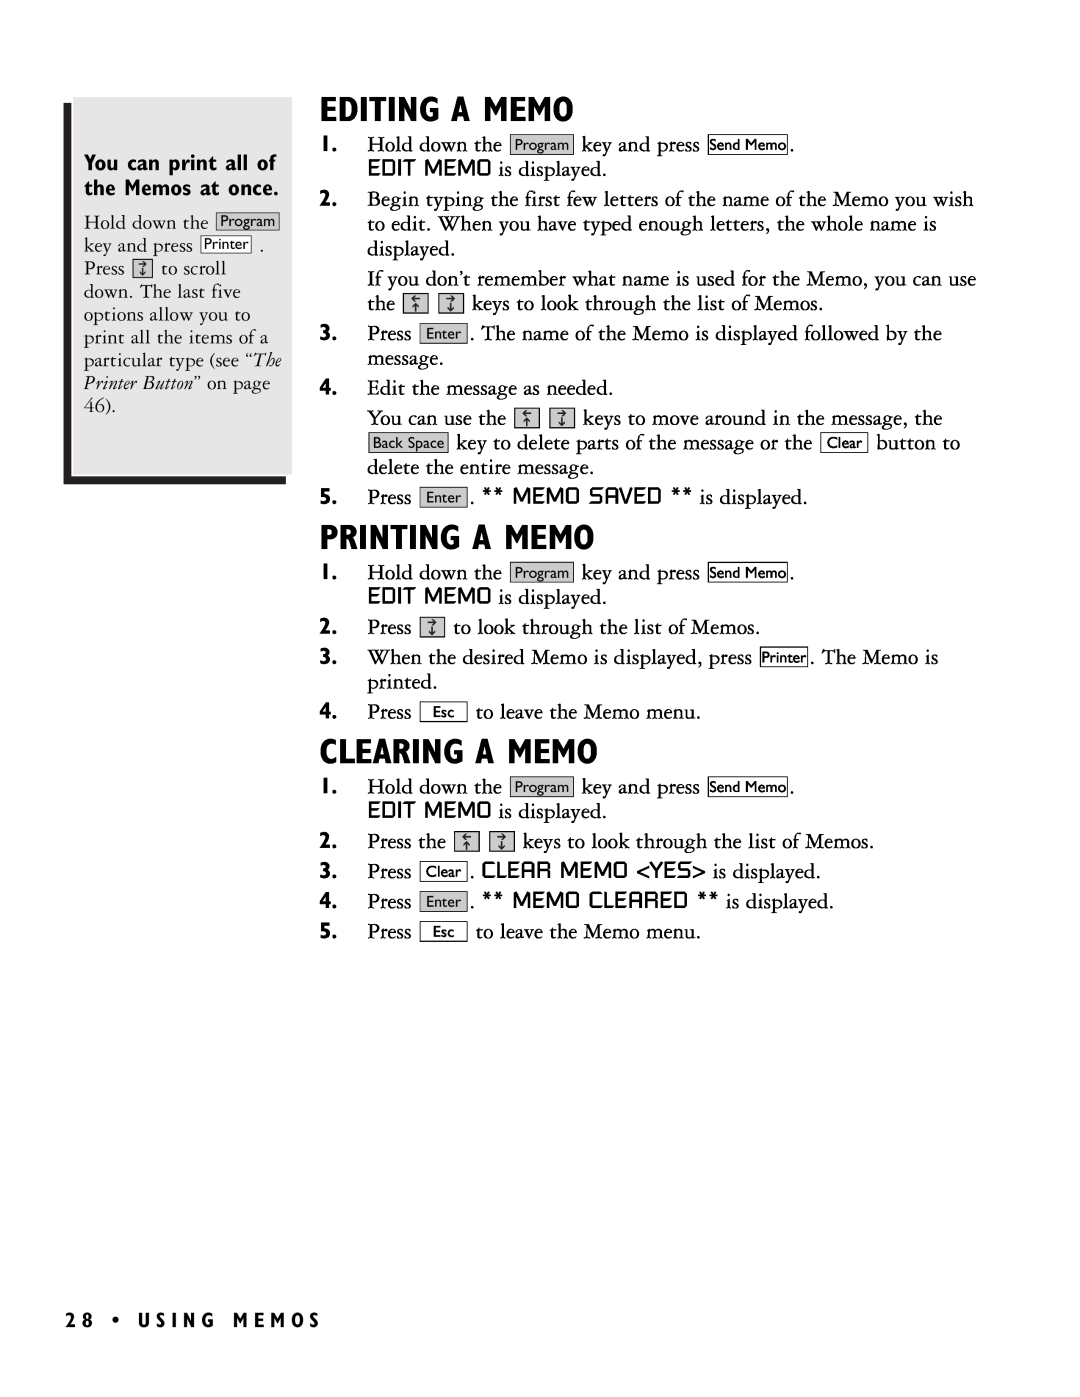 Ultratec PRO80TM manual Editing A Memo, Printing A Memo, Clearing A Memo, You can print all of the Memos at once 